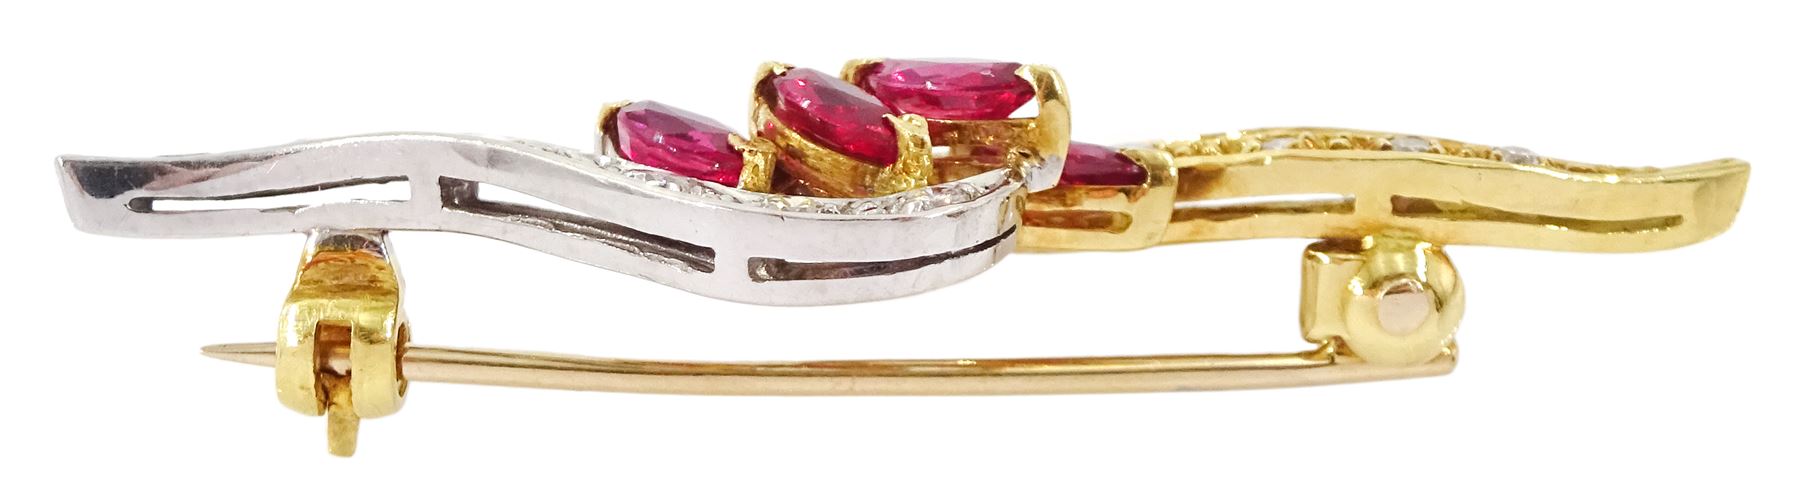 18ct gold marquise cut ruby and round brilliant cut diamond brooch - Image 2 of 2